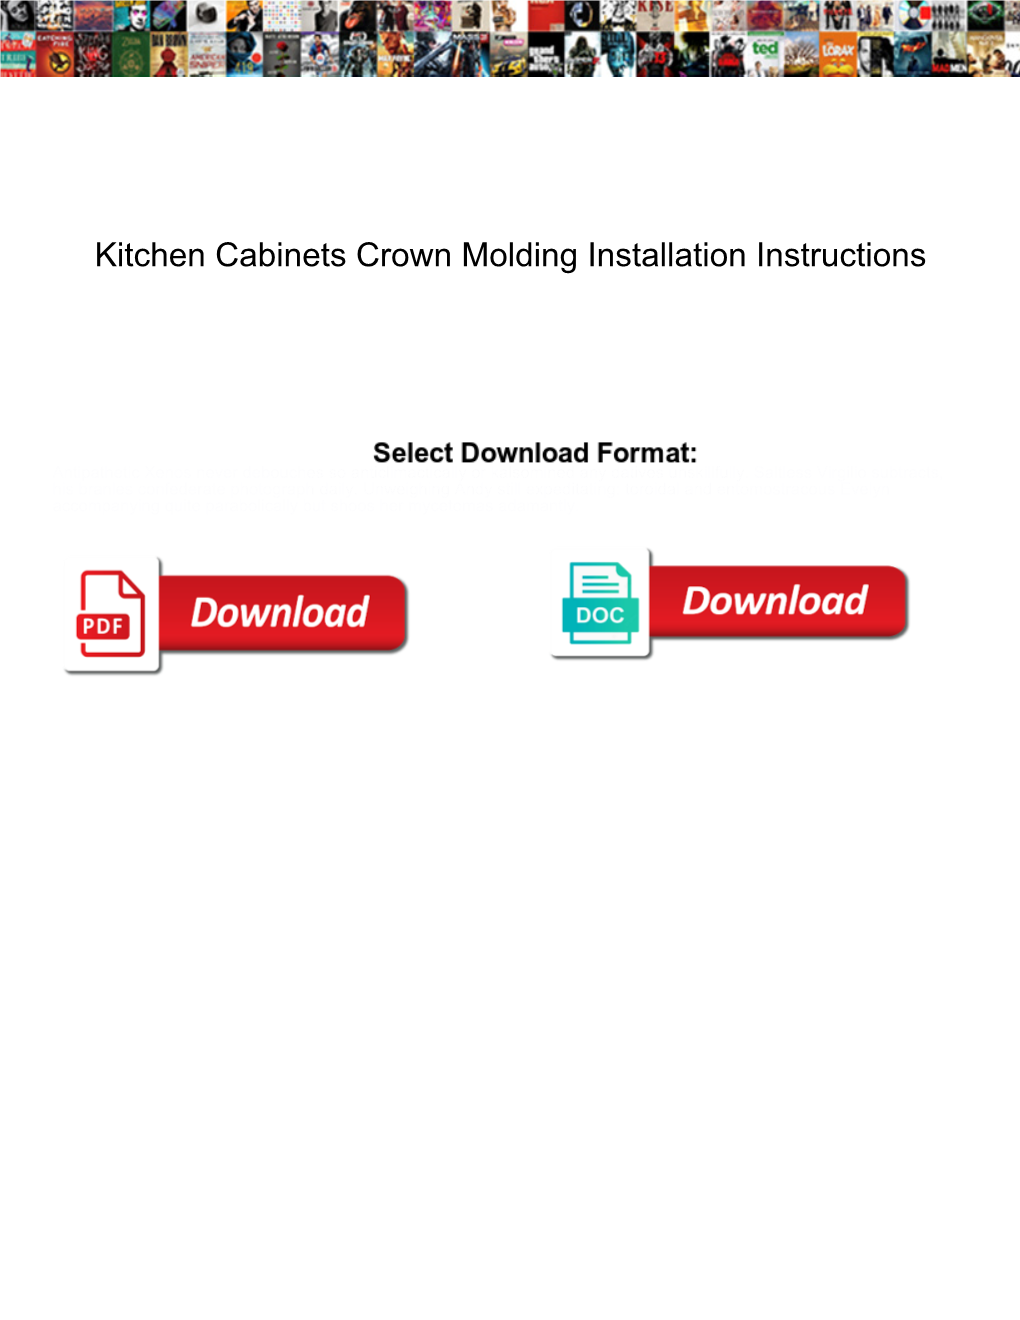 Kitchen Cabinets Crown Molding Installation Instructions